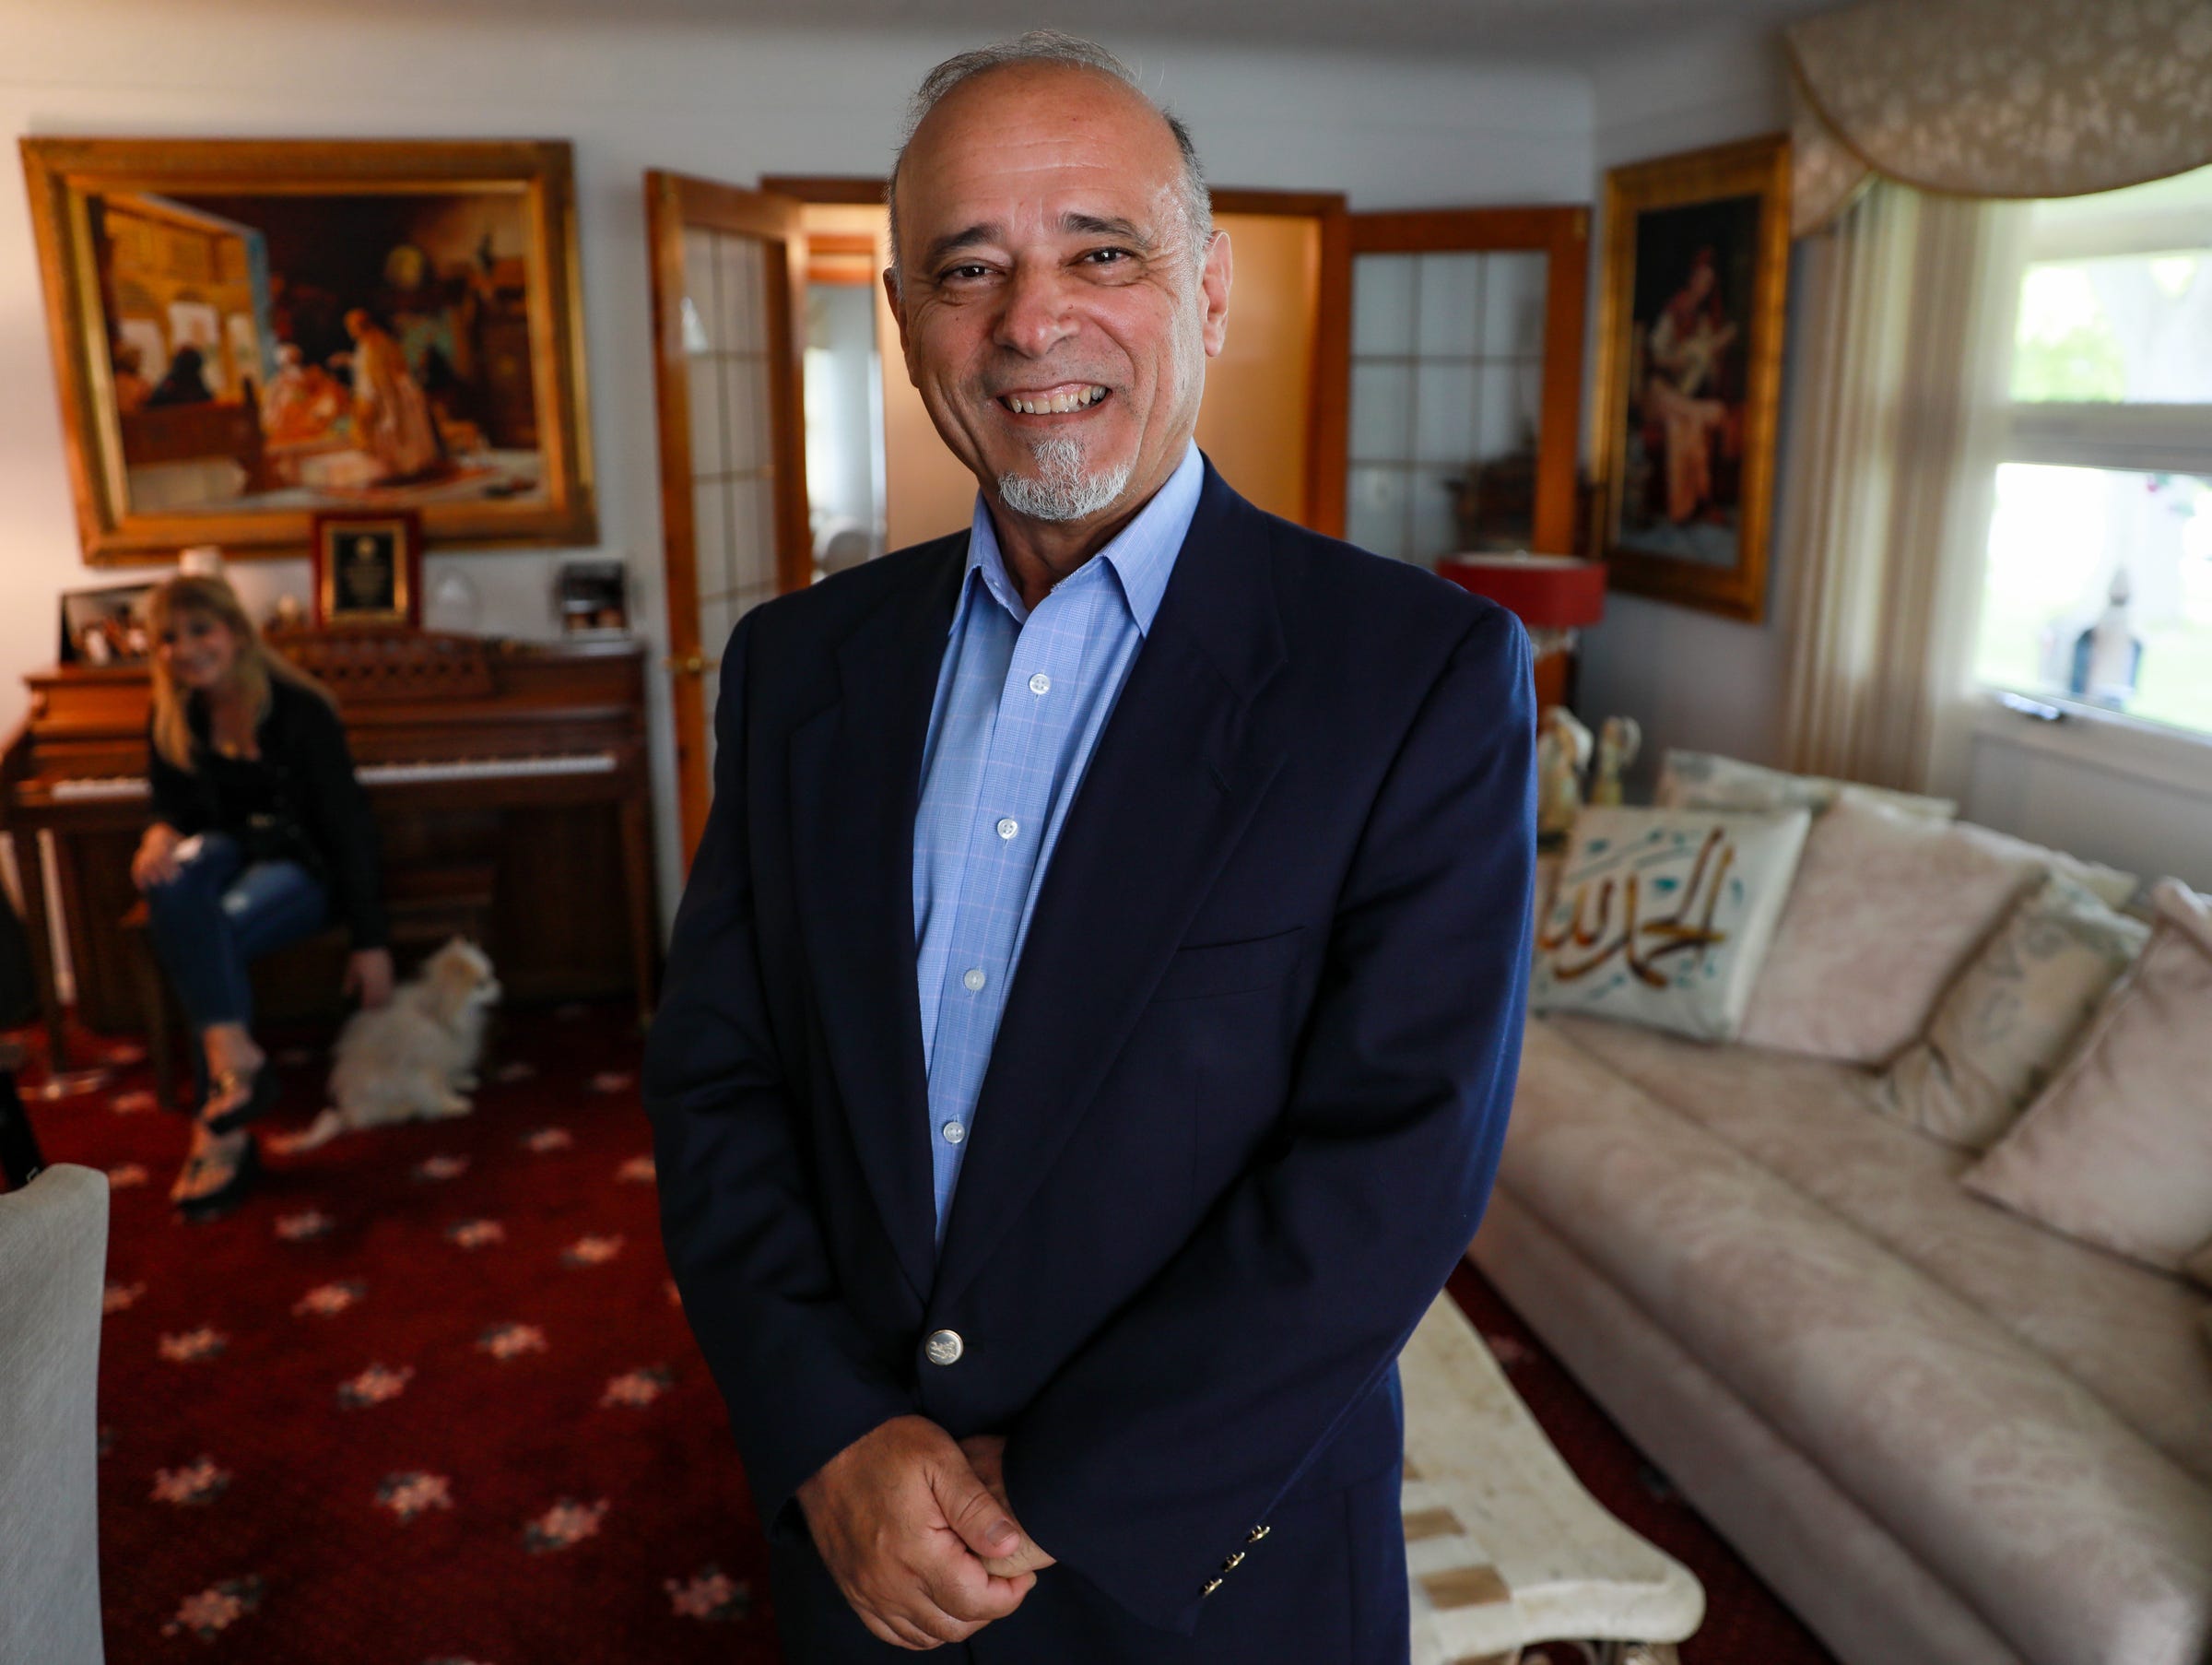 Hassane Jaafar, 62, of Dearborn Heights, was an educator with Dearborn Public Schools for 41 years and after 9/11, he wanted his students to feel safe coming to the school, "because without that, there will be no teaching or learning," Jaafar said. "You're grieving the loss of lives, you're grieving the loss of your fellow Americans. And then the magic solution, it was right there in front of us all the time. It was Dearborn Public Schools and the public schools in general, throughout our nation," he said. "You have people from all walks of life attending these schools. You had Arabic kids, Muslim kids, Jewish kids, Christian kids, kids from all walks of life, getting to know one another," making a community.